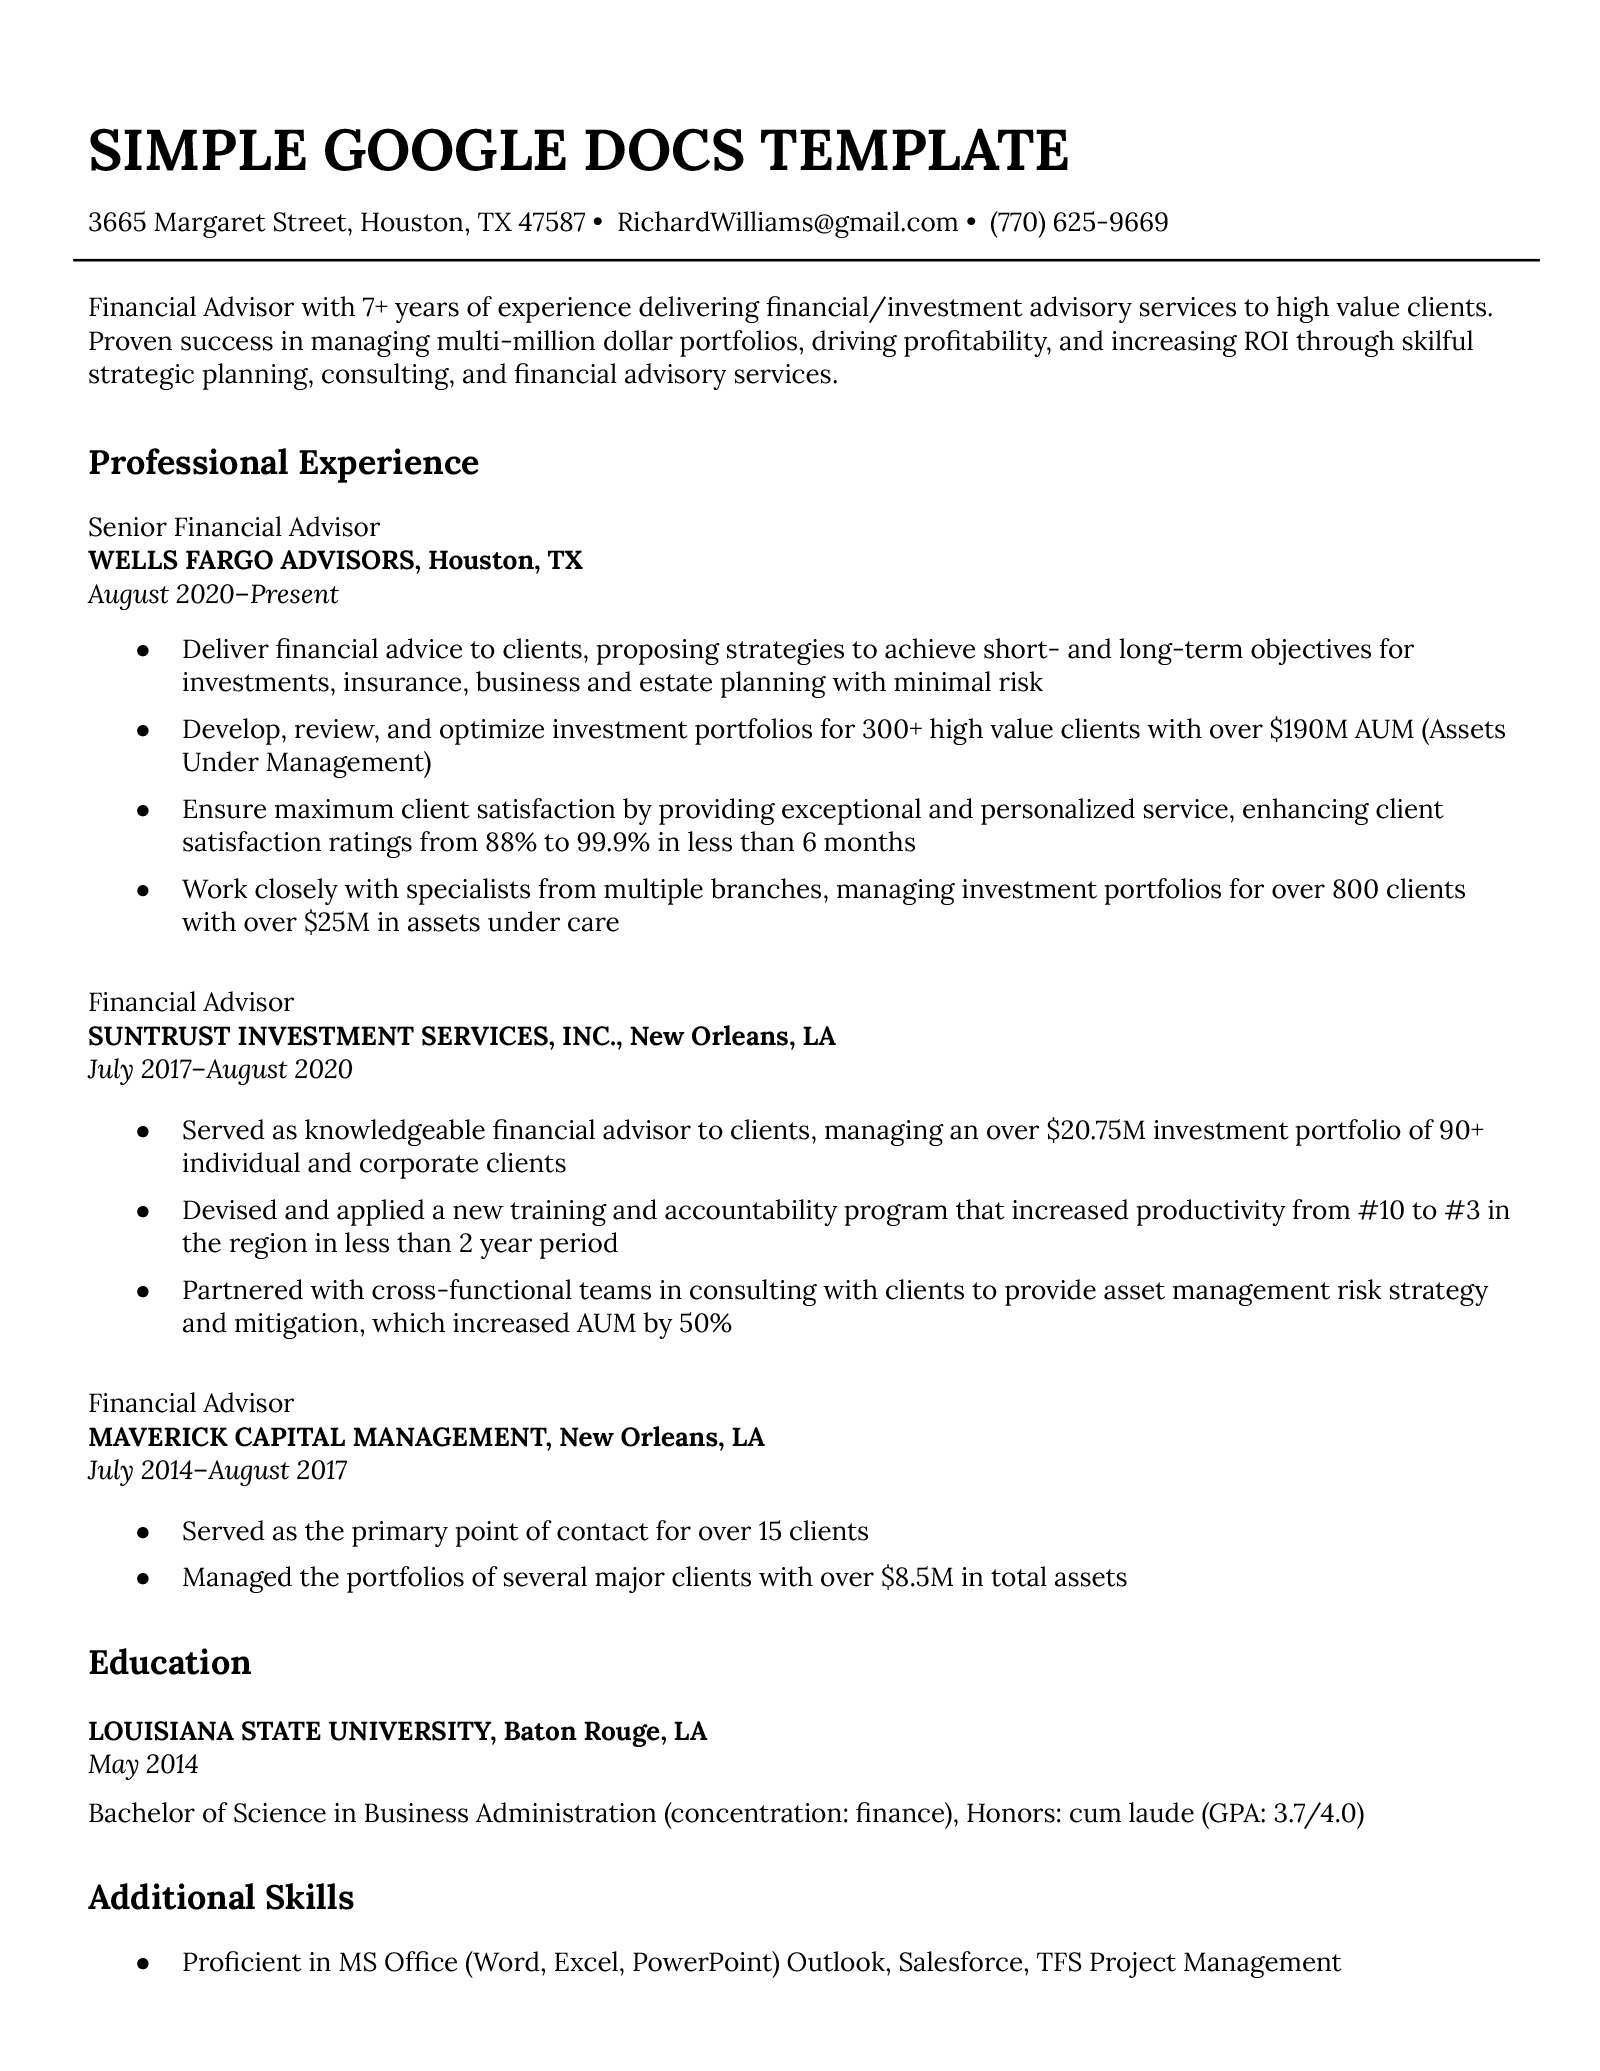 A simple resume template for Google Docs, with a basic black and white color scheme and formal design